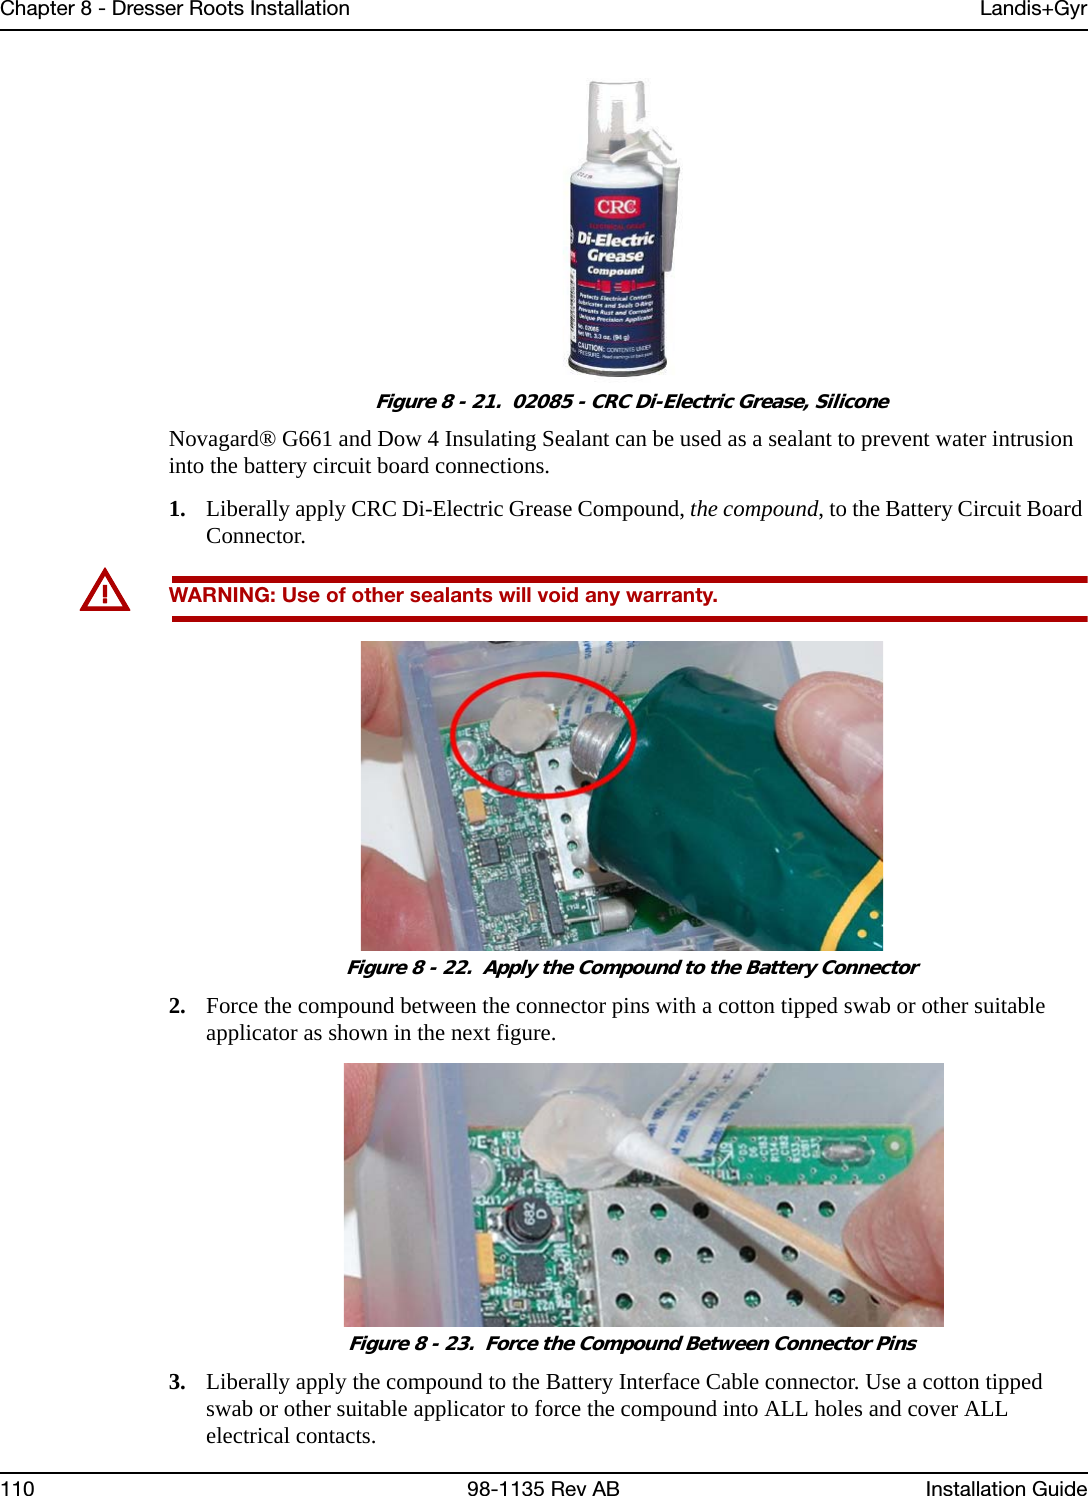 Chapter 8 - Dresser Roots Installation Landis+Gyr110 98-1135 Rev AB Installation Guide Figure 8 - 21.  02085 - CRC Di-Electric Grease, SiliconeNovagard® G661 and Dow 4 Insulating Sealant can be used as a sealant to prevent water intrusion into the battery circuit board connections.1. Liberally apply CRC Di-Electric Grease Compound, the compound, to the Battery Circuit Board Connector. UWARNING: Use of other sealants will void any warranty.  Figure 8 - 22.  Apply the Compound to the Battery Connector2. Force the compound between the connector pins with a cotton tipped swab or other suitable applicator as shown in the next figure. Figure 8 - 23.  Force the Compound Between Connector Pins3. Liberally apply the compound to the Battery Interface Cable connector. Use a cotton tipped swab or other suitable applicator to force the compound into ALL holes and cover ALL electrical contacts.